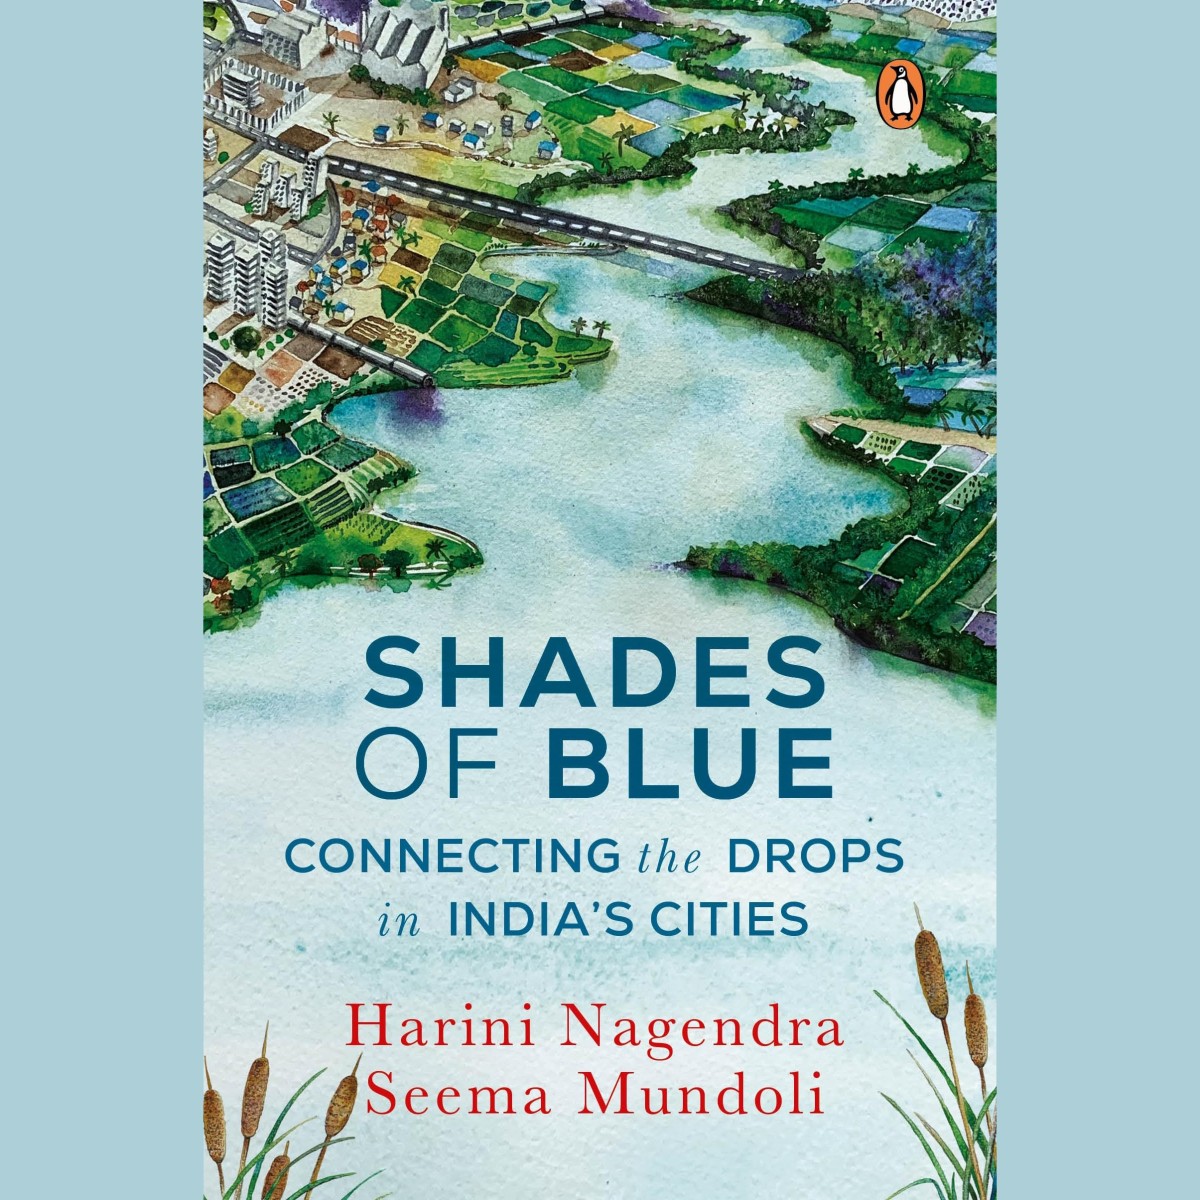 Book Excerpt: Shades of Blue